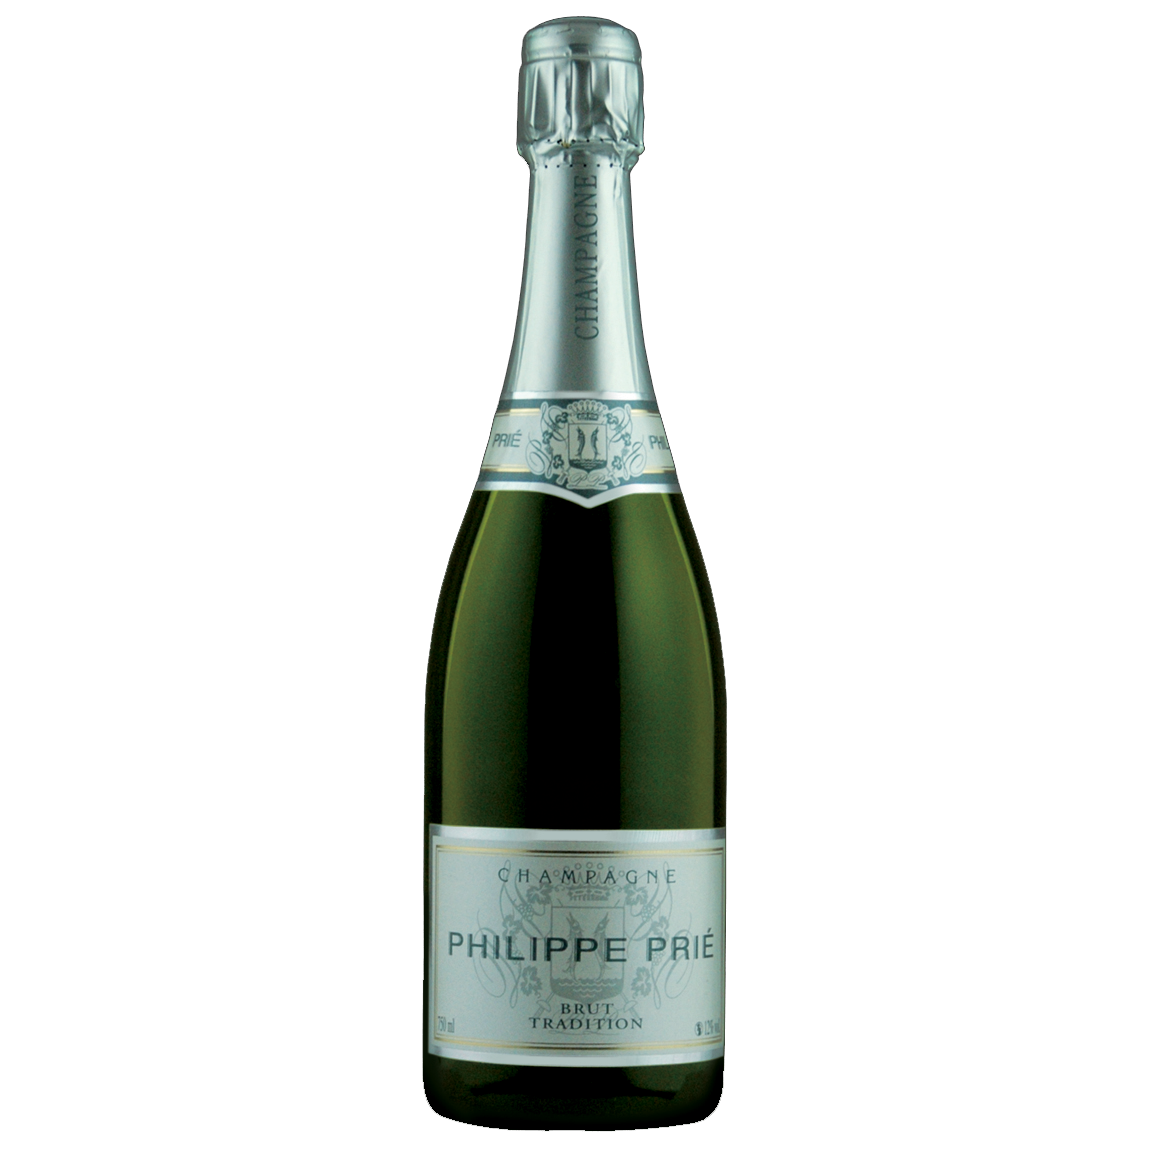 Sparkling Wine - Philippe Prie Champagne "Brut Tradition" NV 75cl - France*